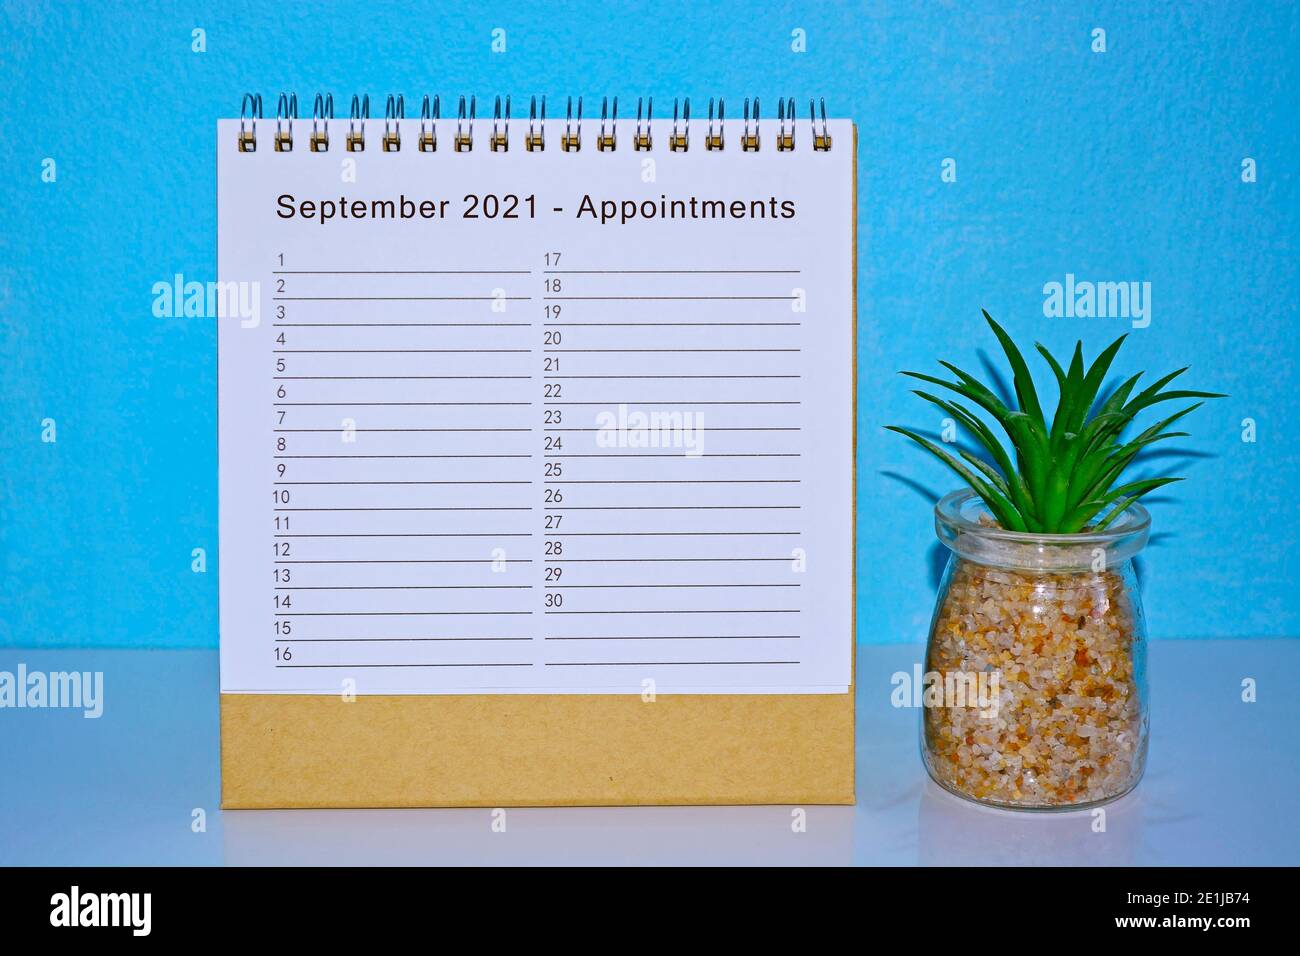 September 2021 Appointments calendar with blue background and potted plant Stock Photo